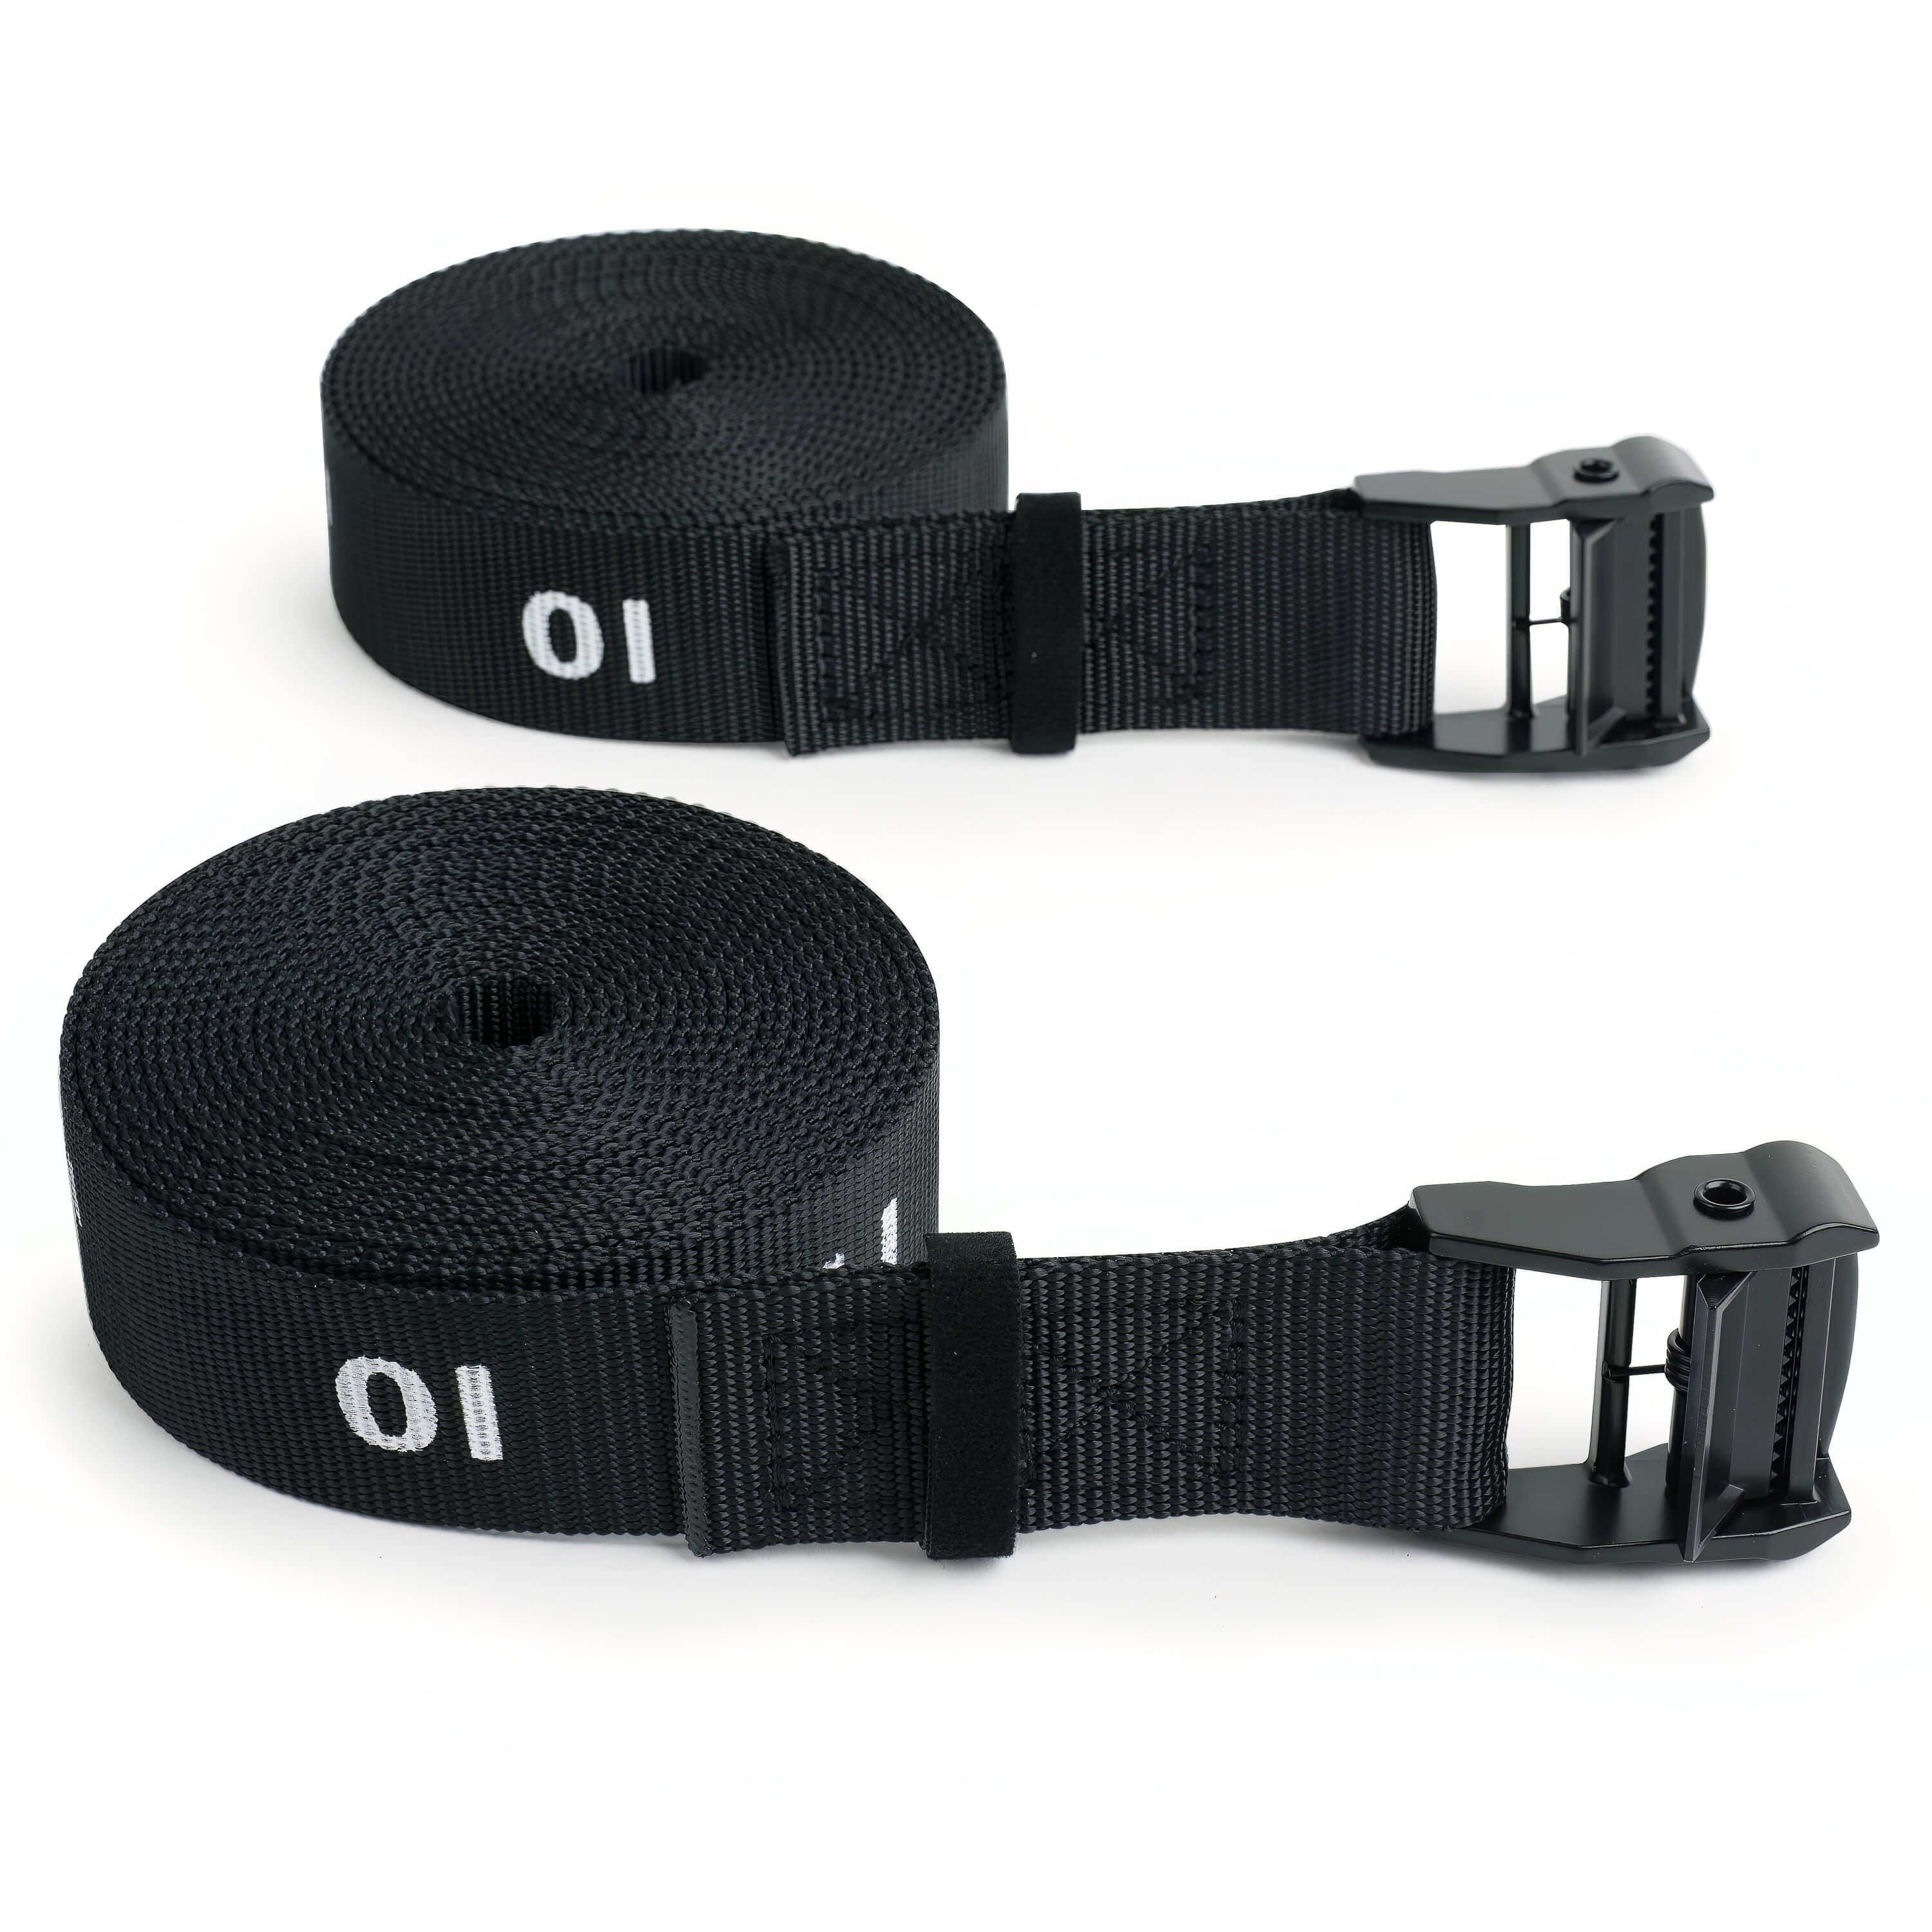 Gymnastic Rings Straps with Numbers - Atomic Iron